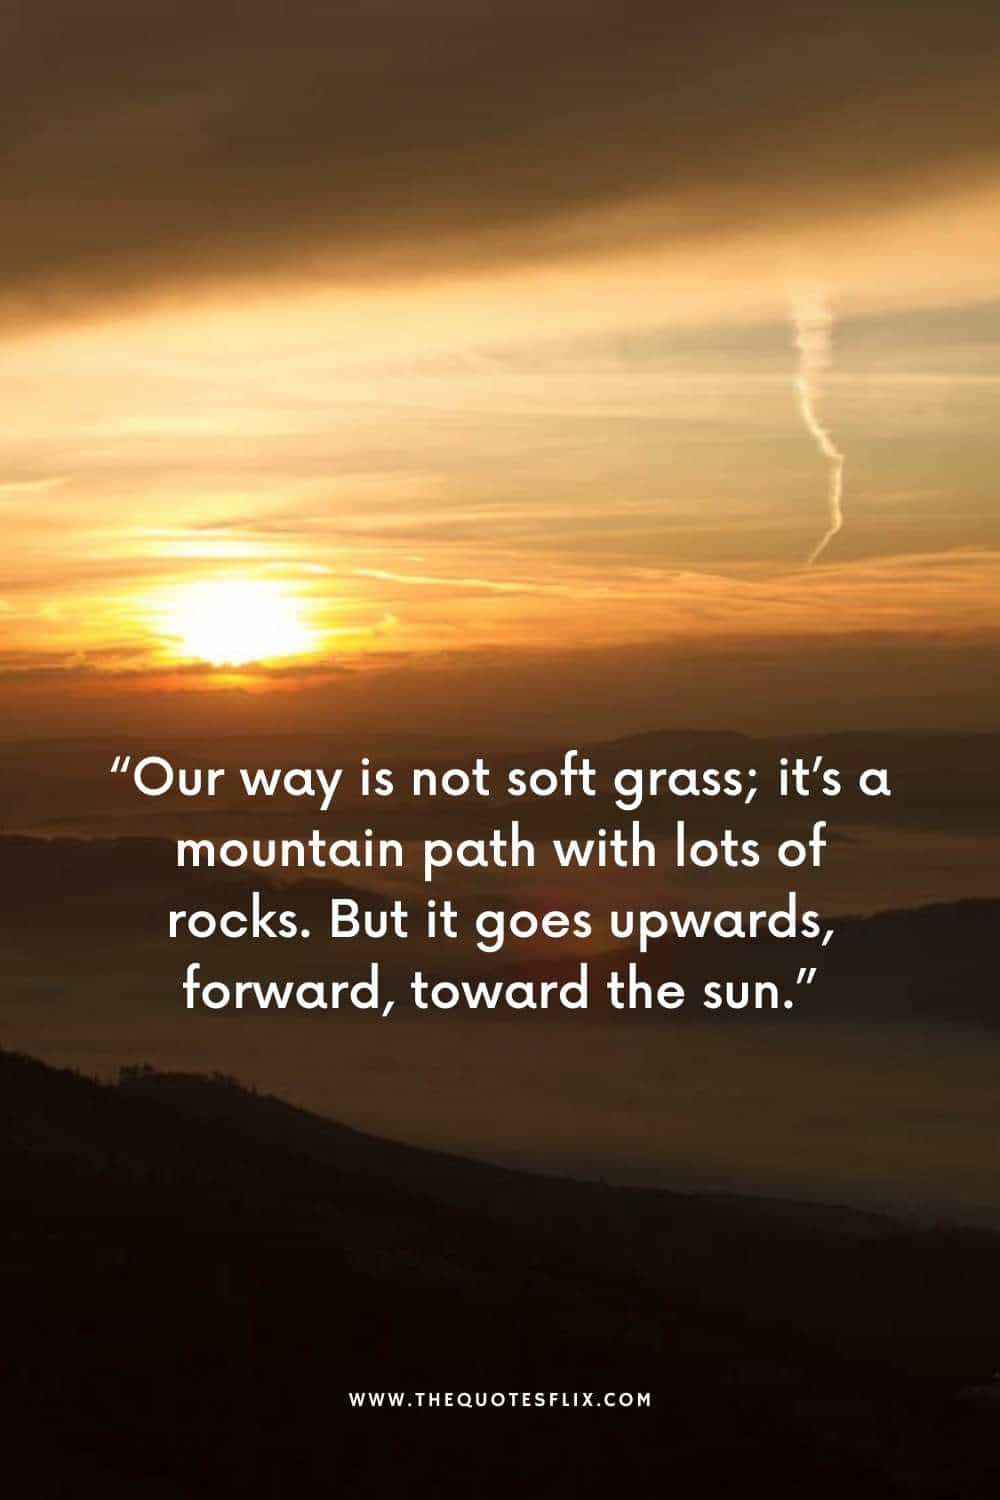 cervical cancer quotes - way is not soft grass its mountain path towards the sun